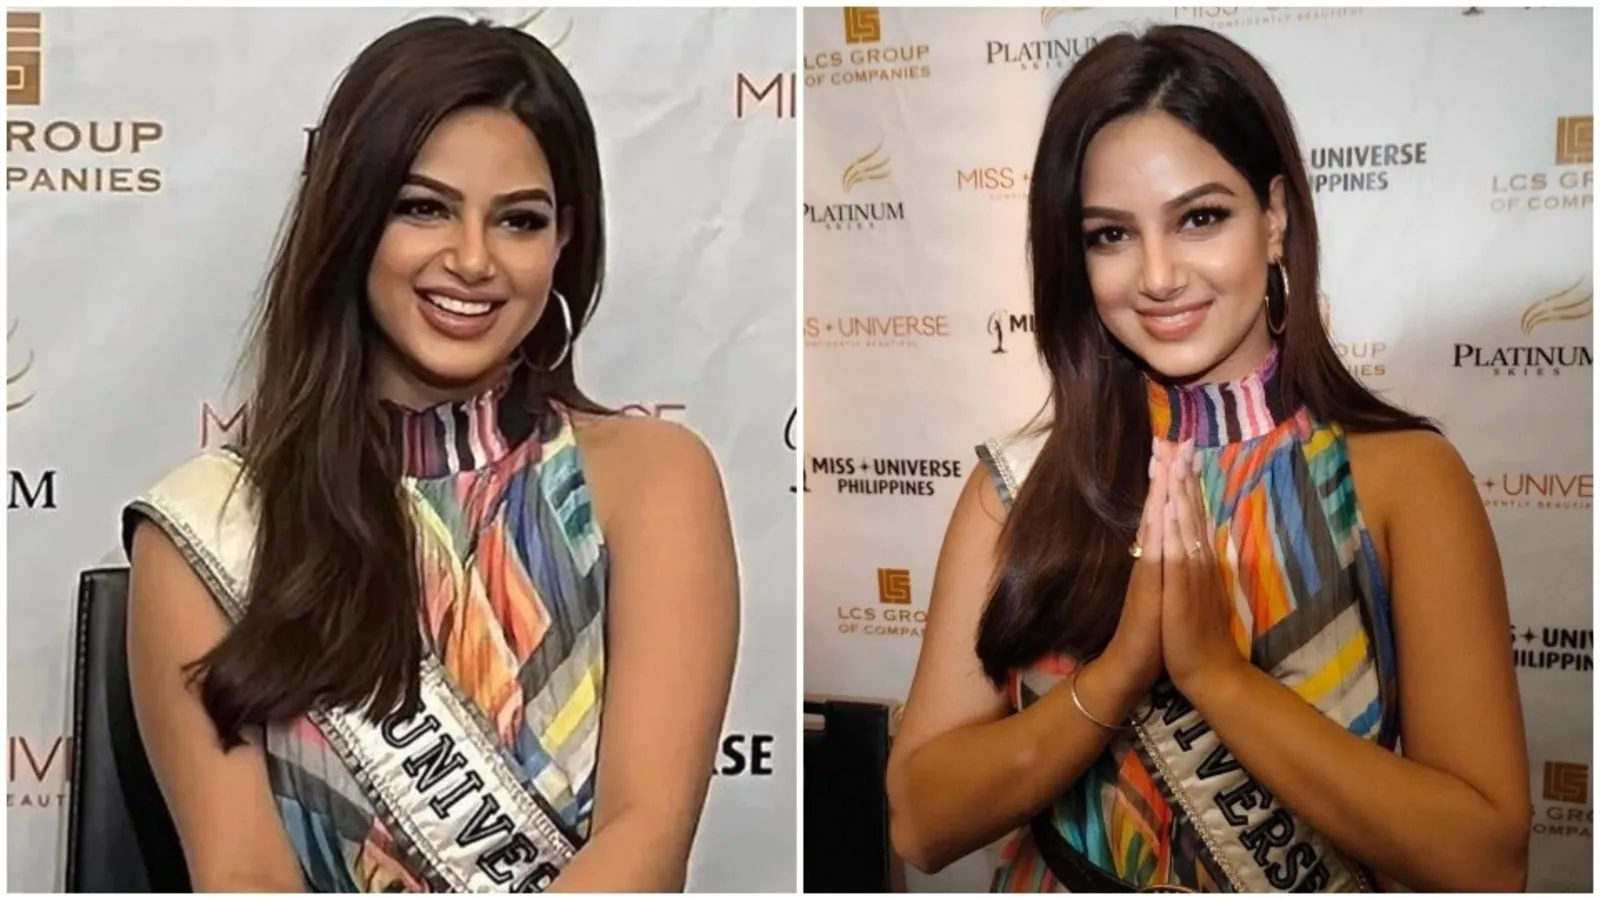 Harnaaz Sandhu takes over Philippines in gorgeous printed halter neck dress: All pics inside